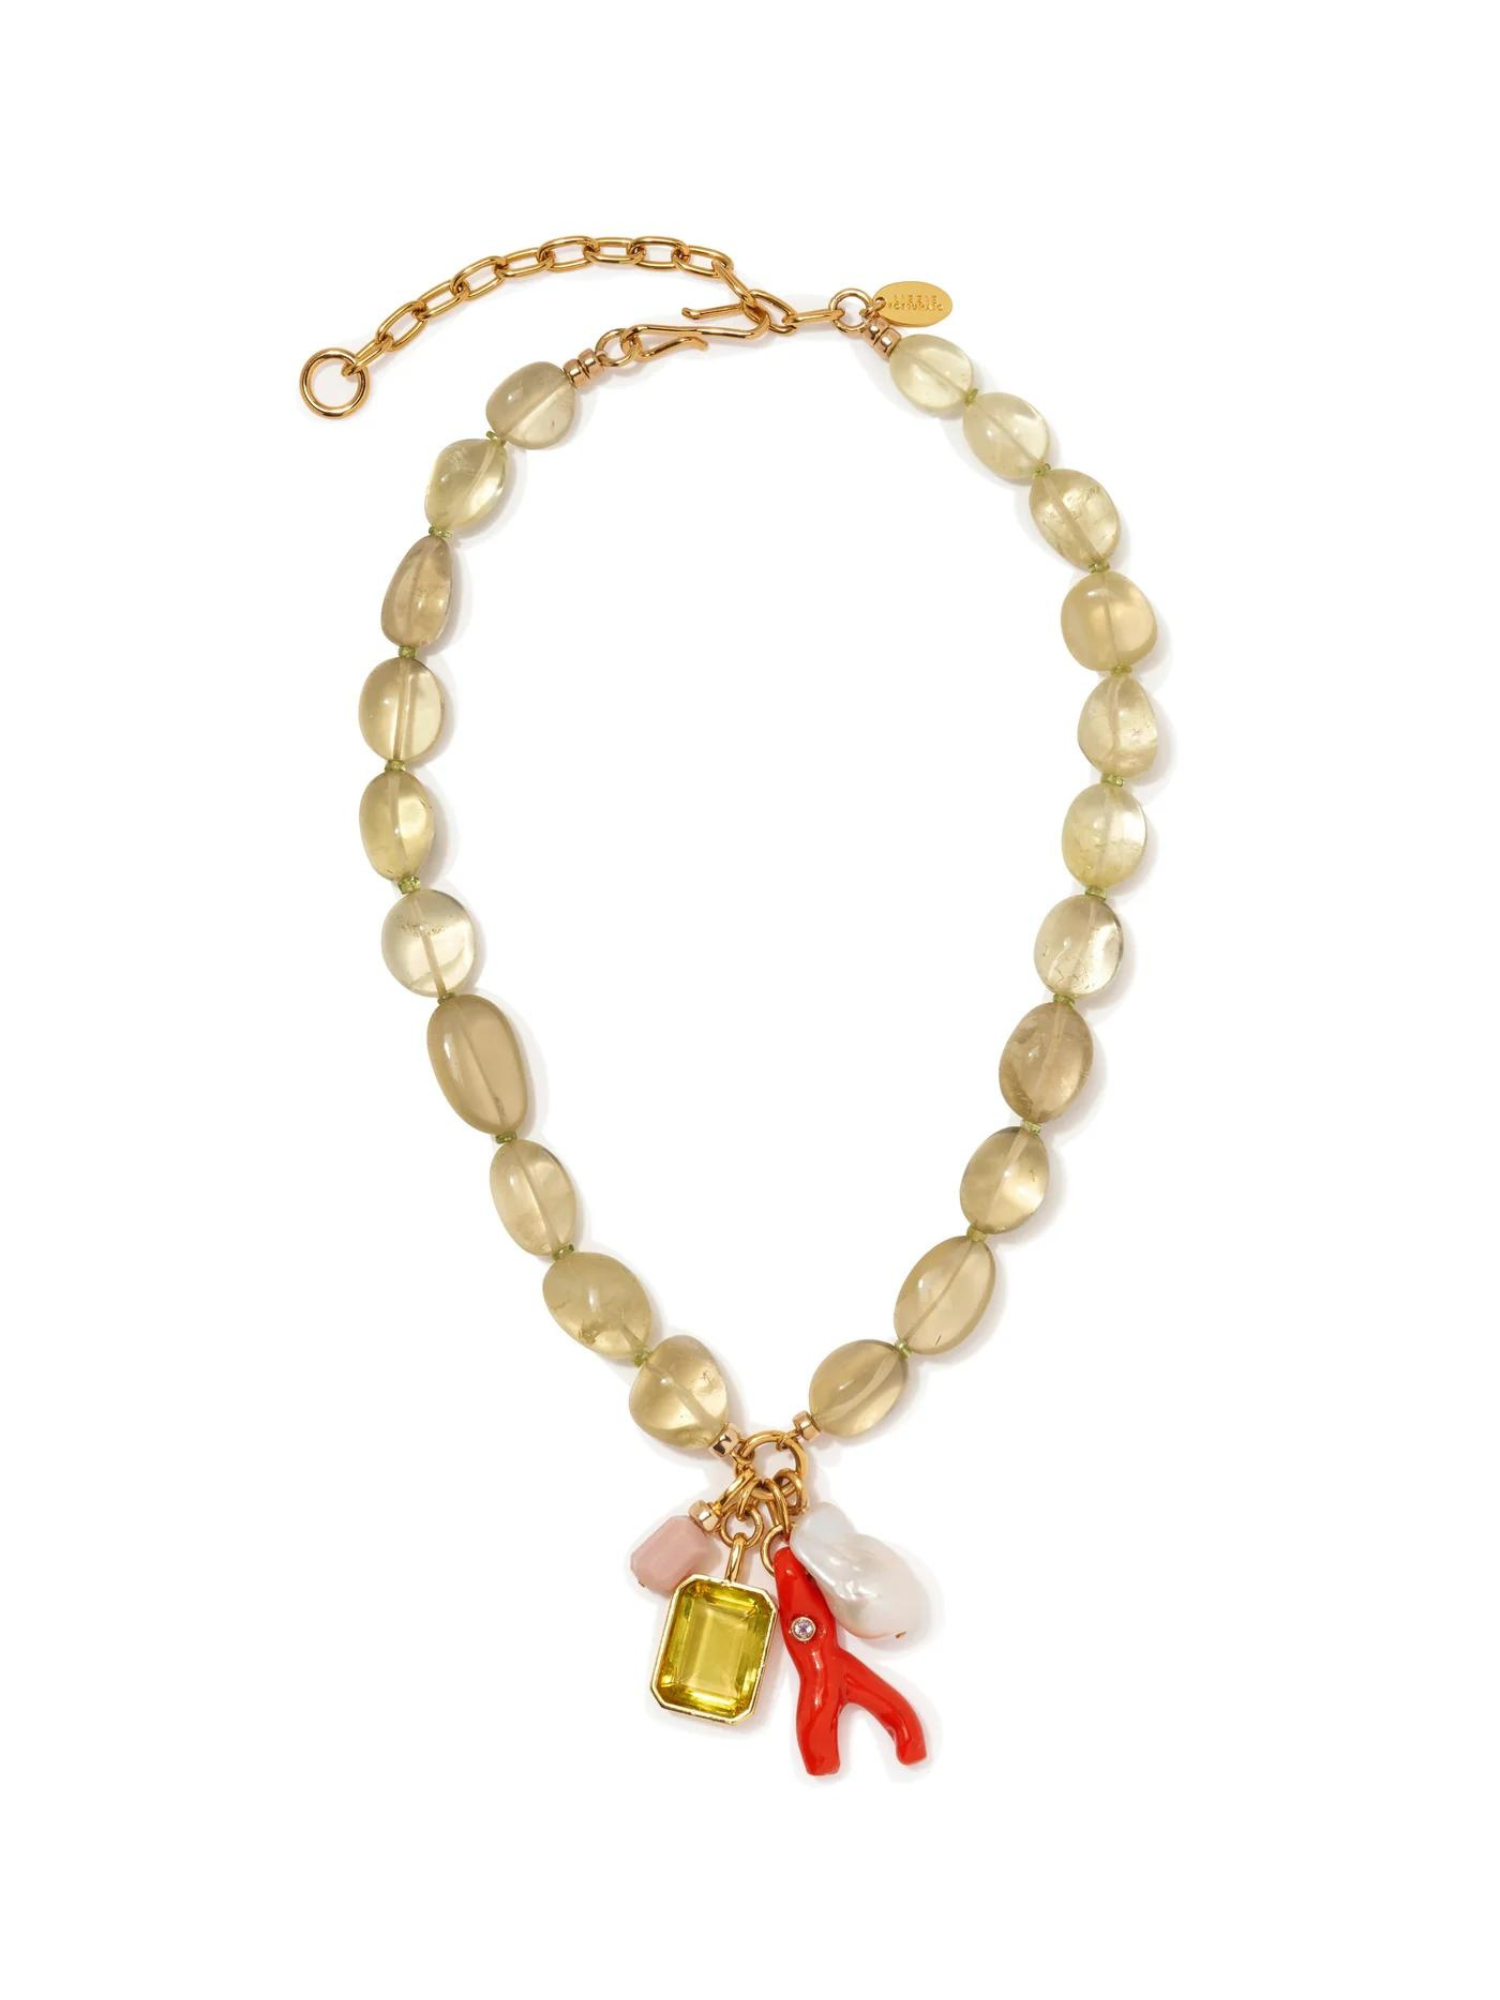 Lizzie Fortunato Beaded Reef Necklace